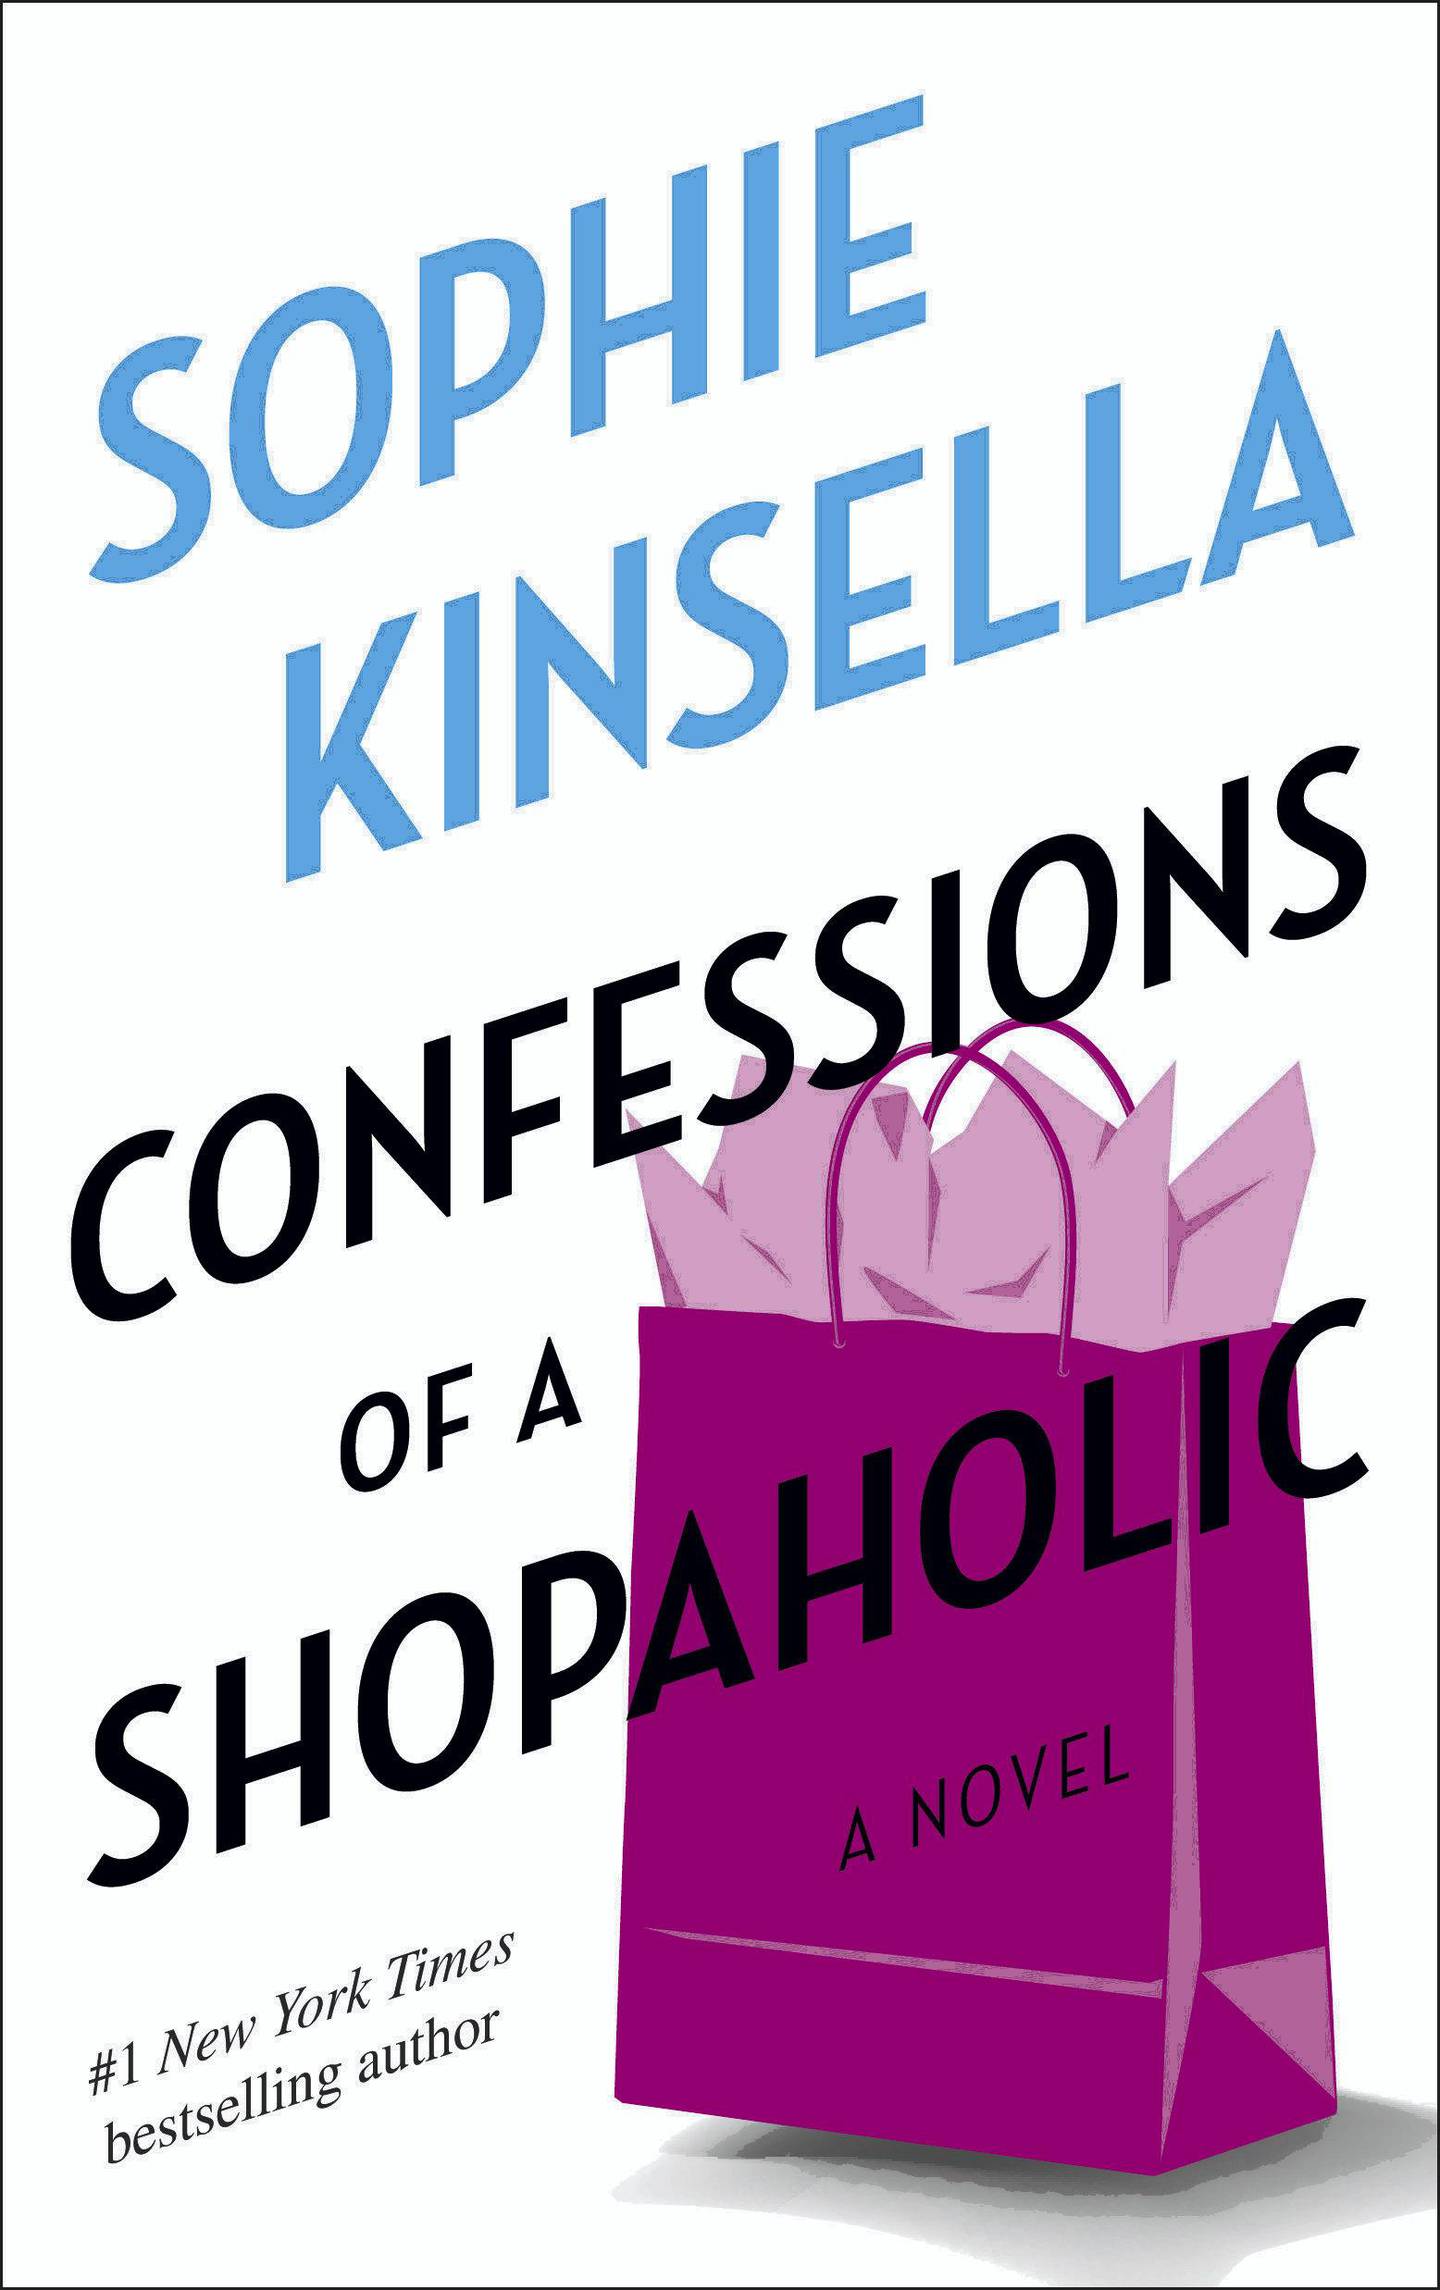 Confessions of a Shopaholic by Sophie Kinsella. Courtesy Penguin Random House